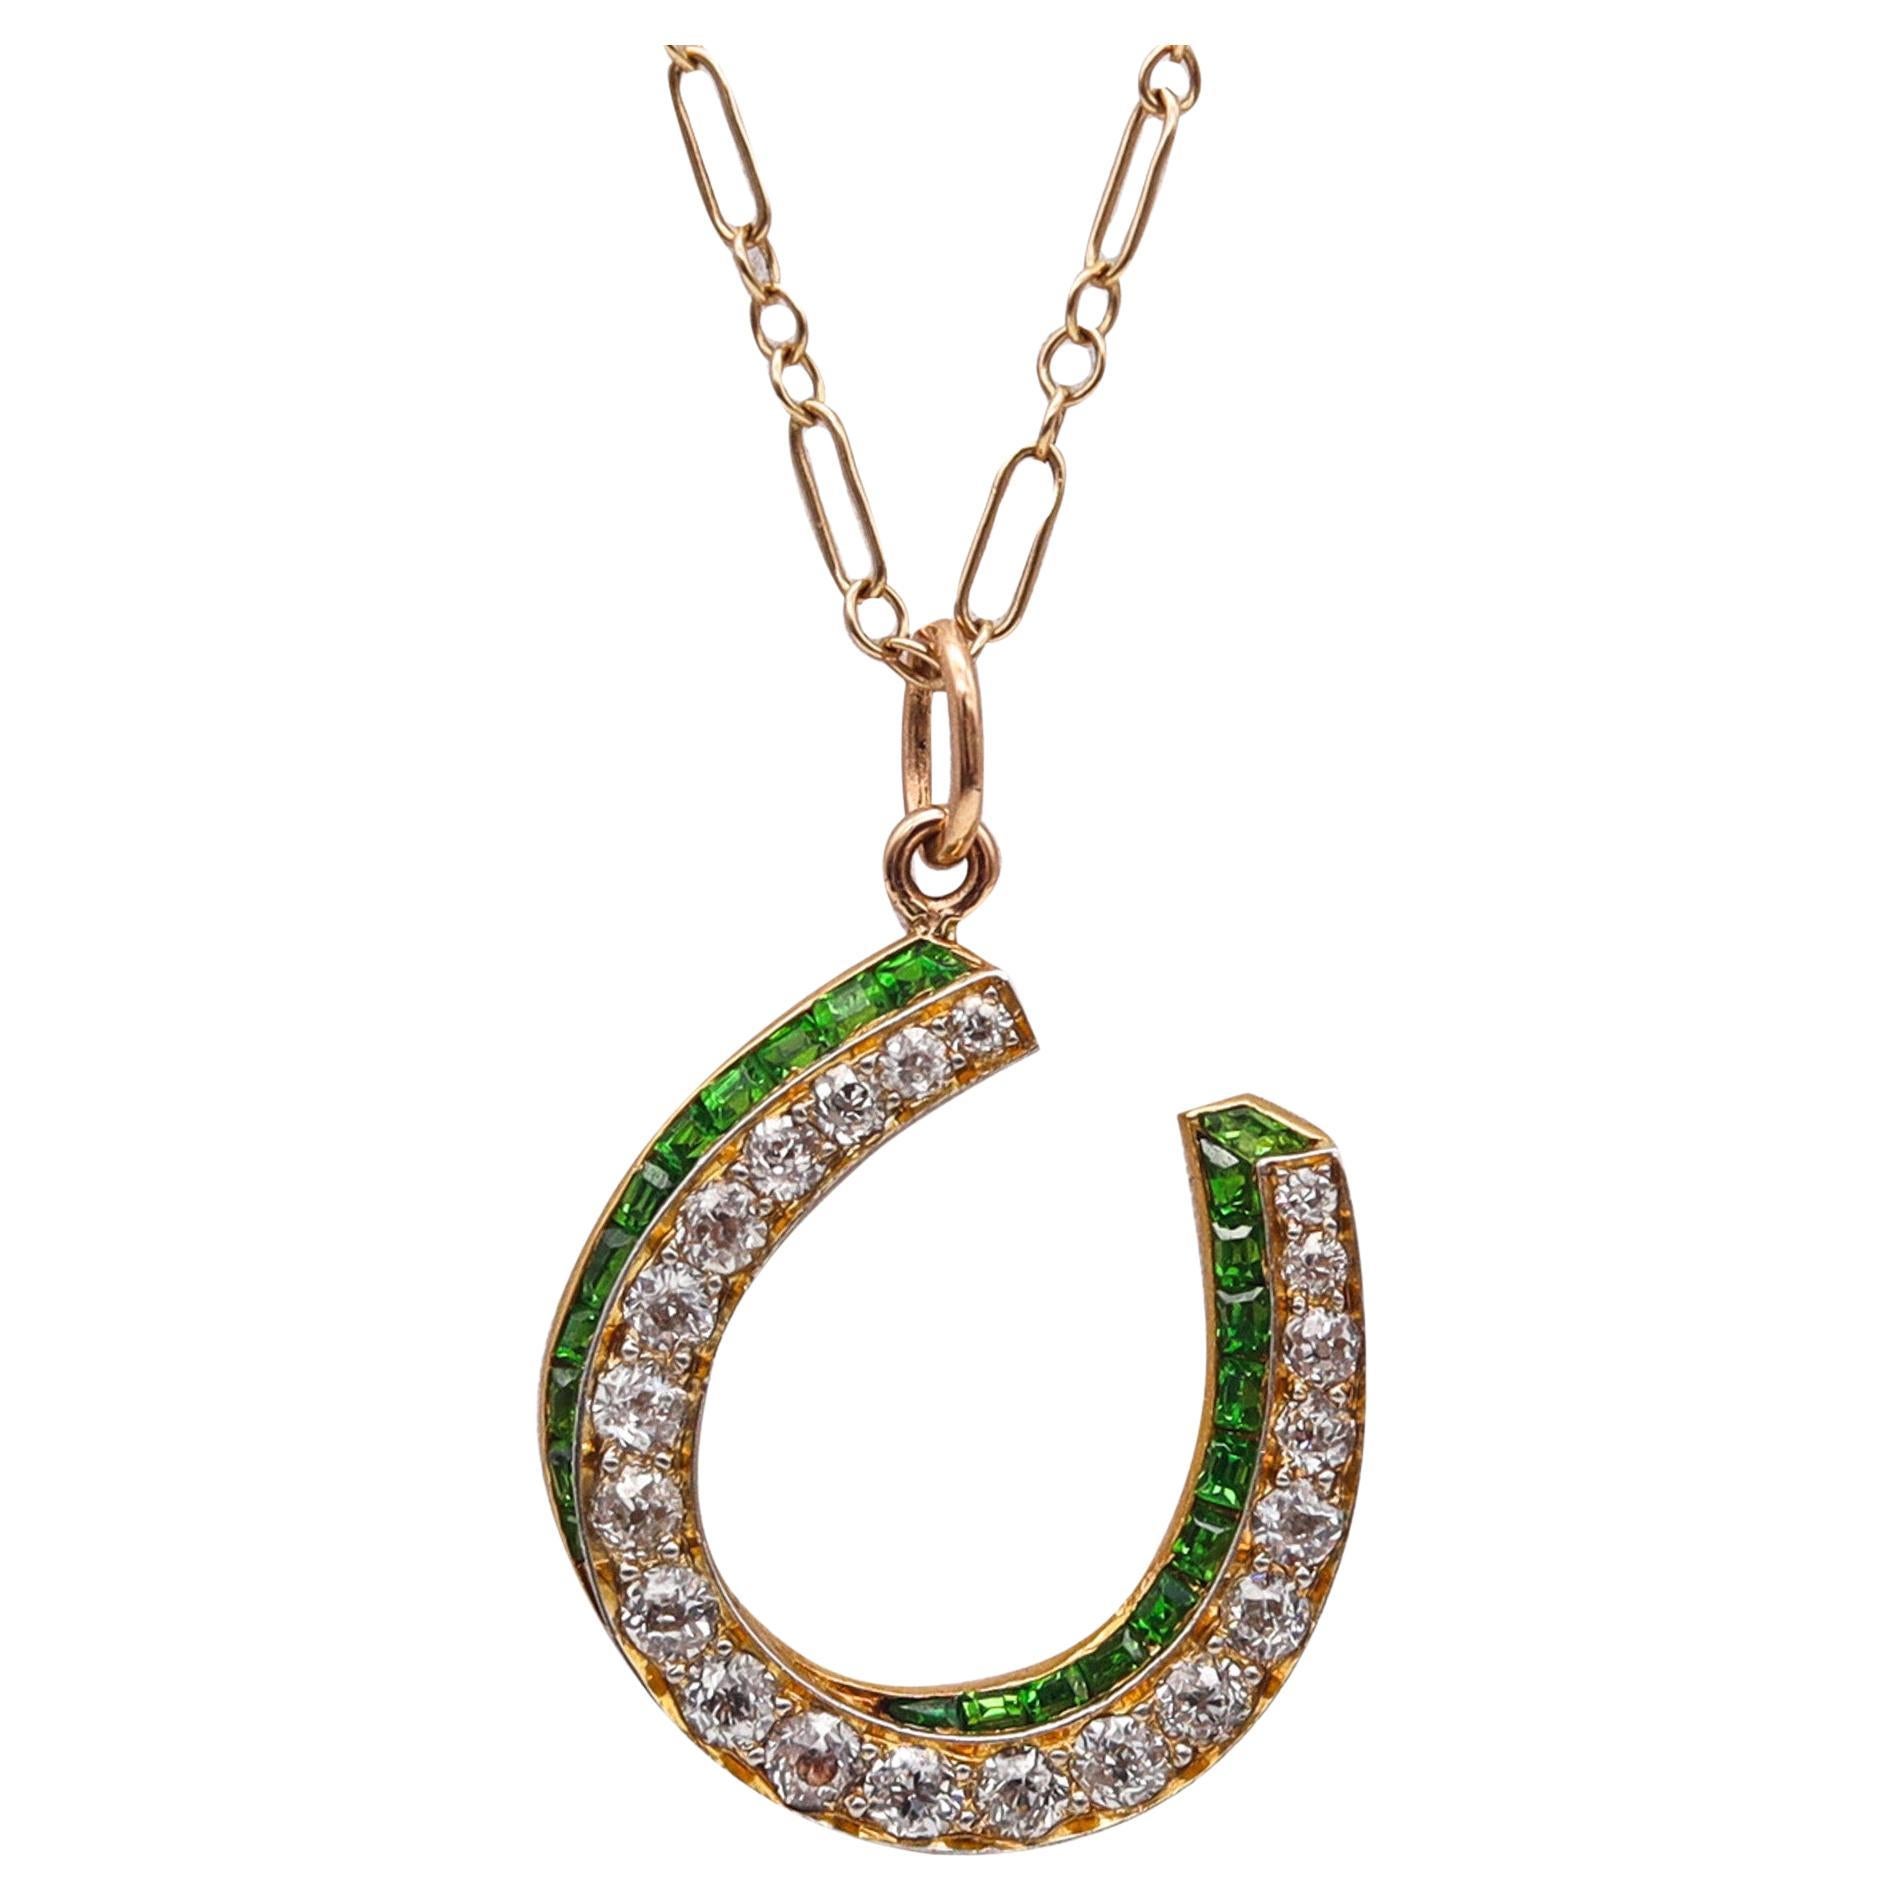 Edwardian 1900 Horseshoe Lucky Pendant In 18Kt Gold With Demantoids And Diamonds For Sale